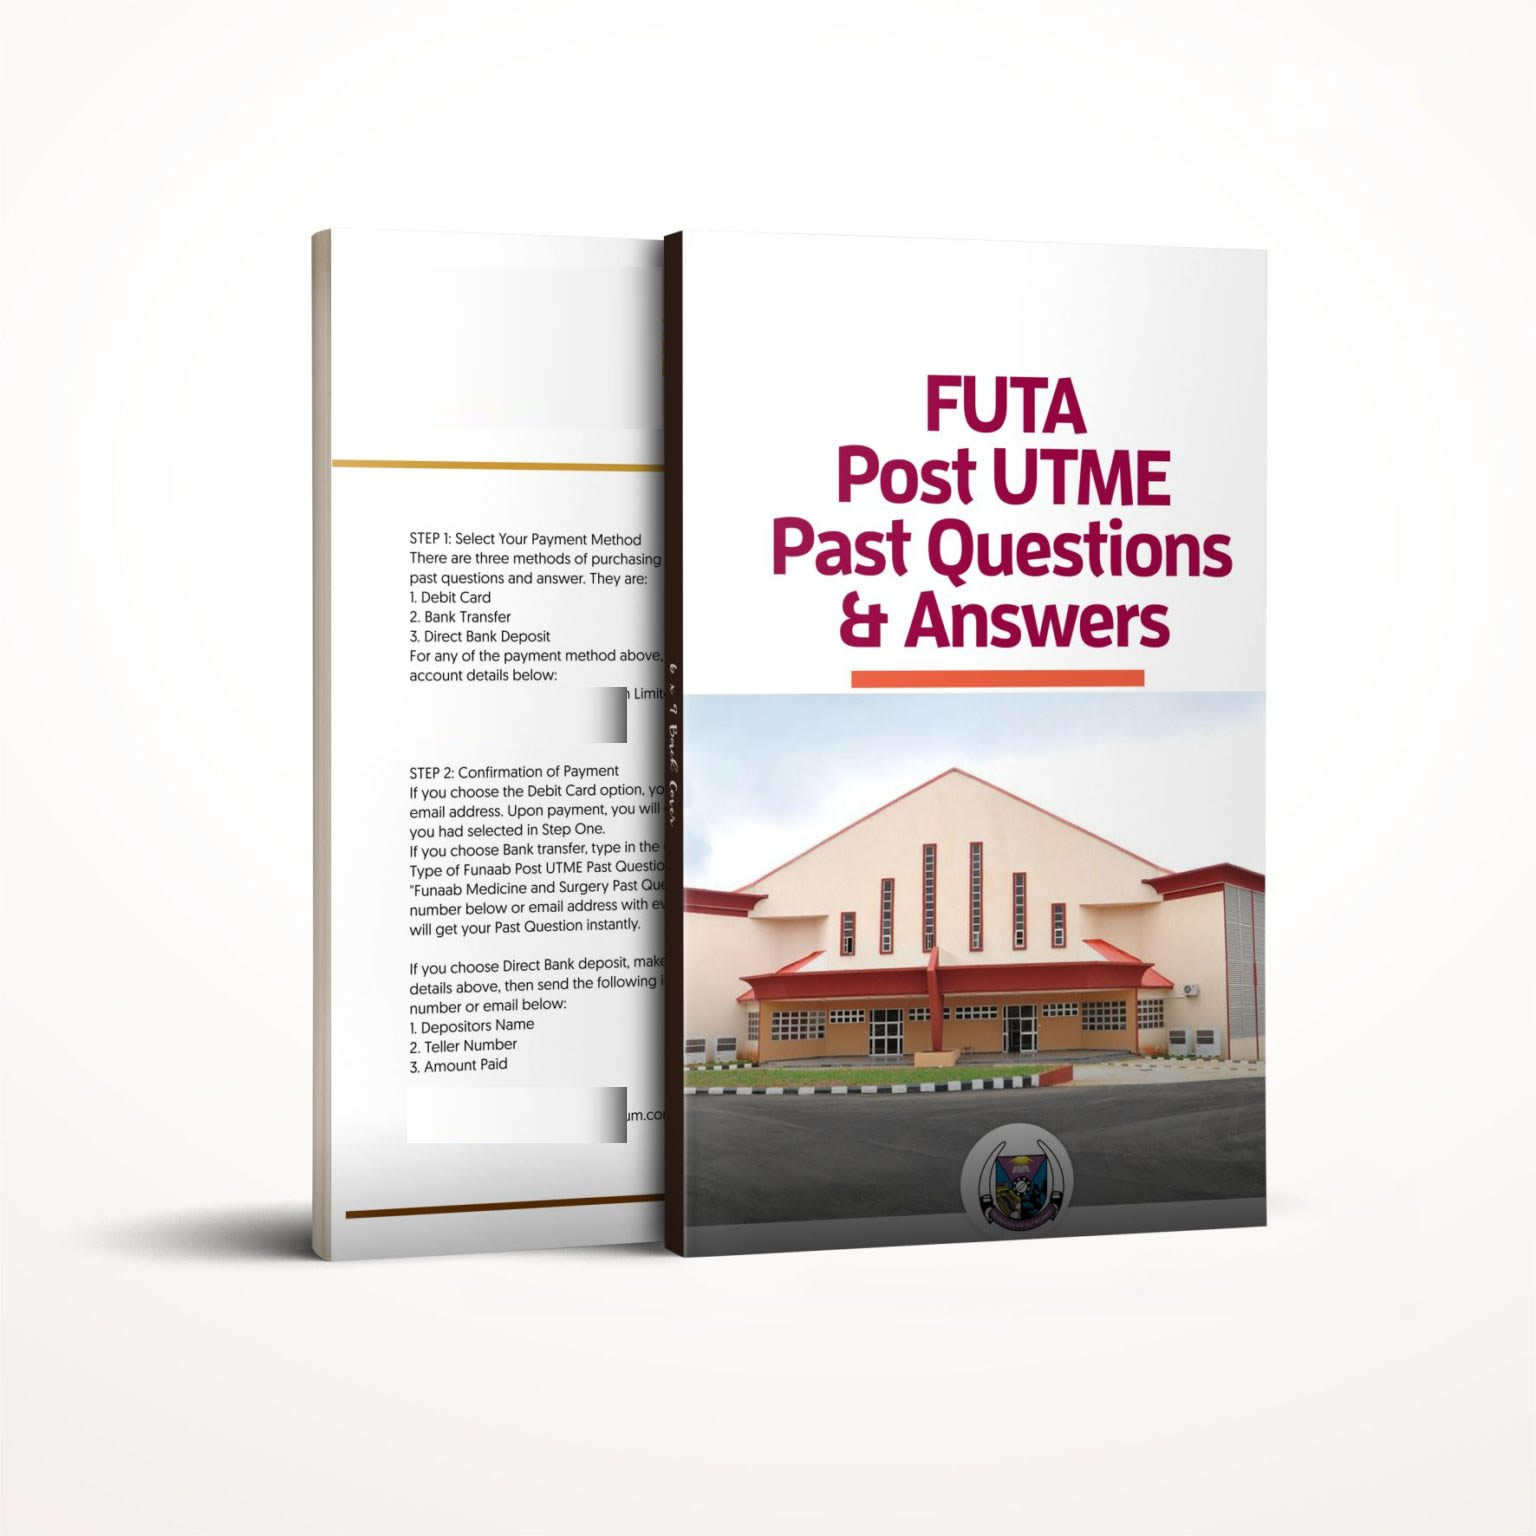 futa post utme past questions and answers - Pdf